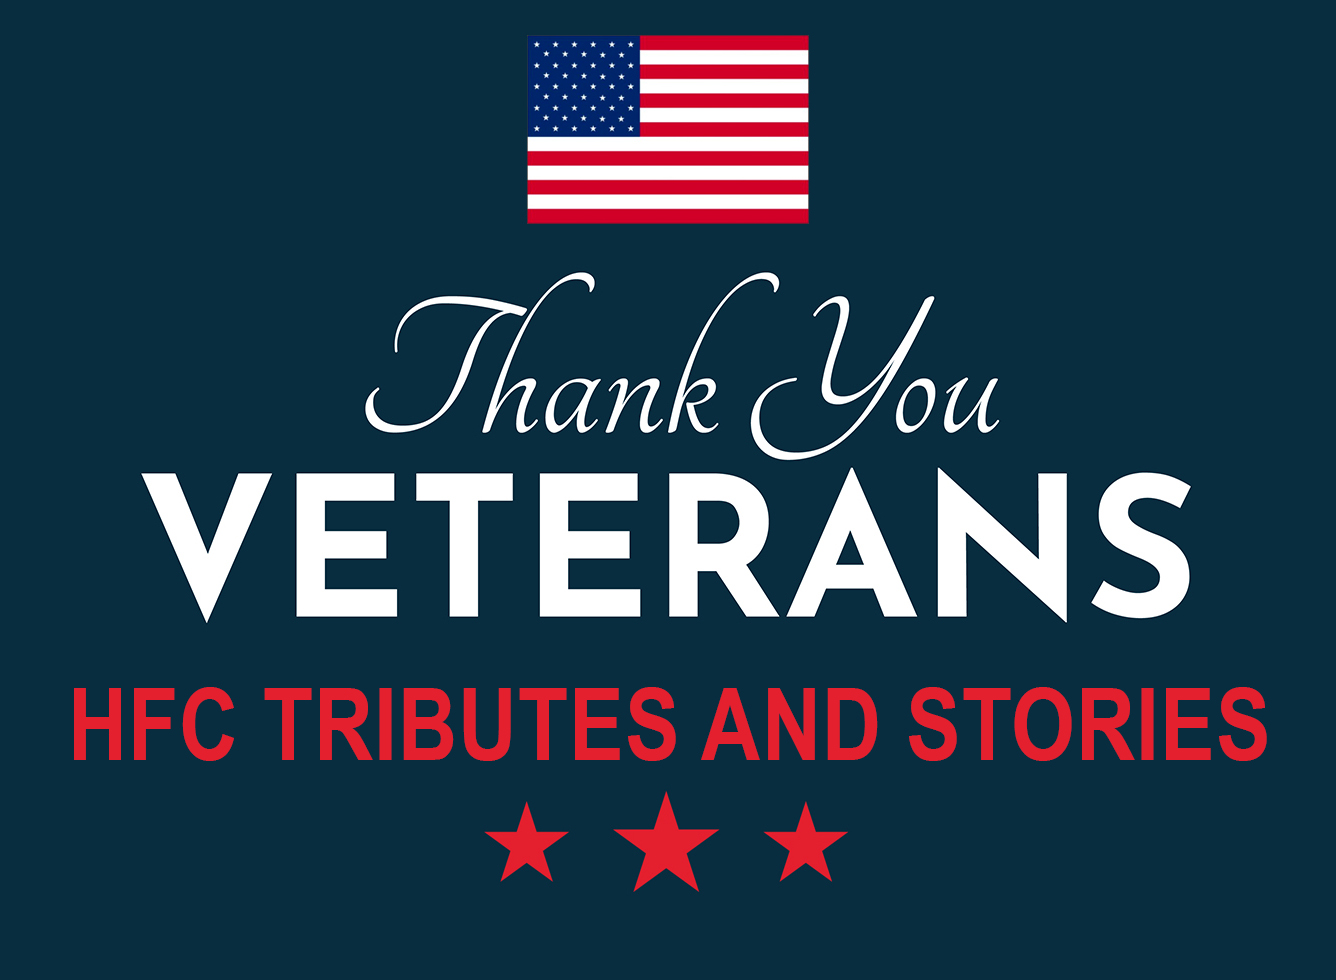 HFC veterans day graphic